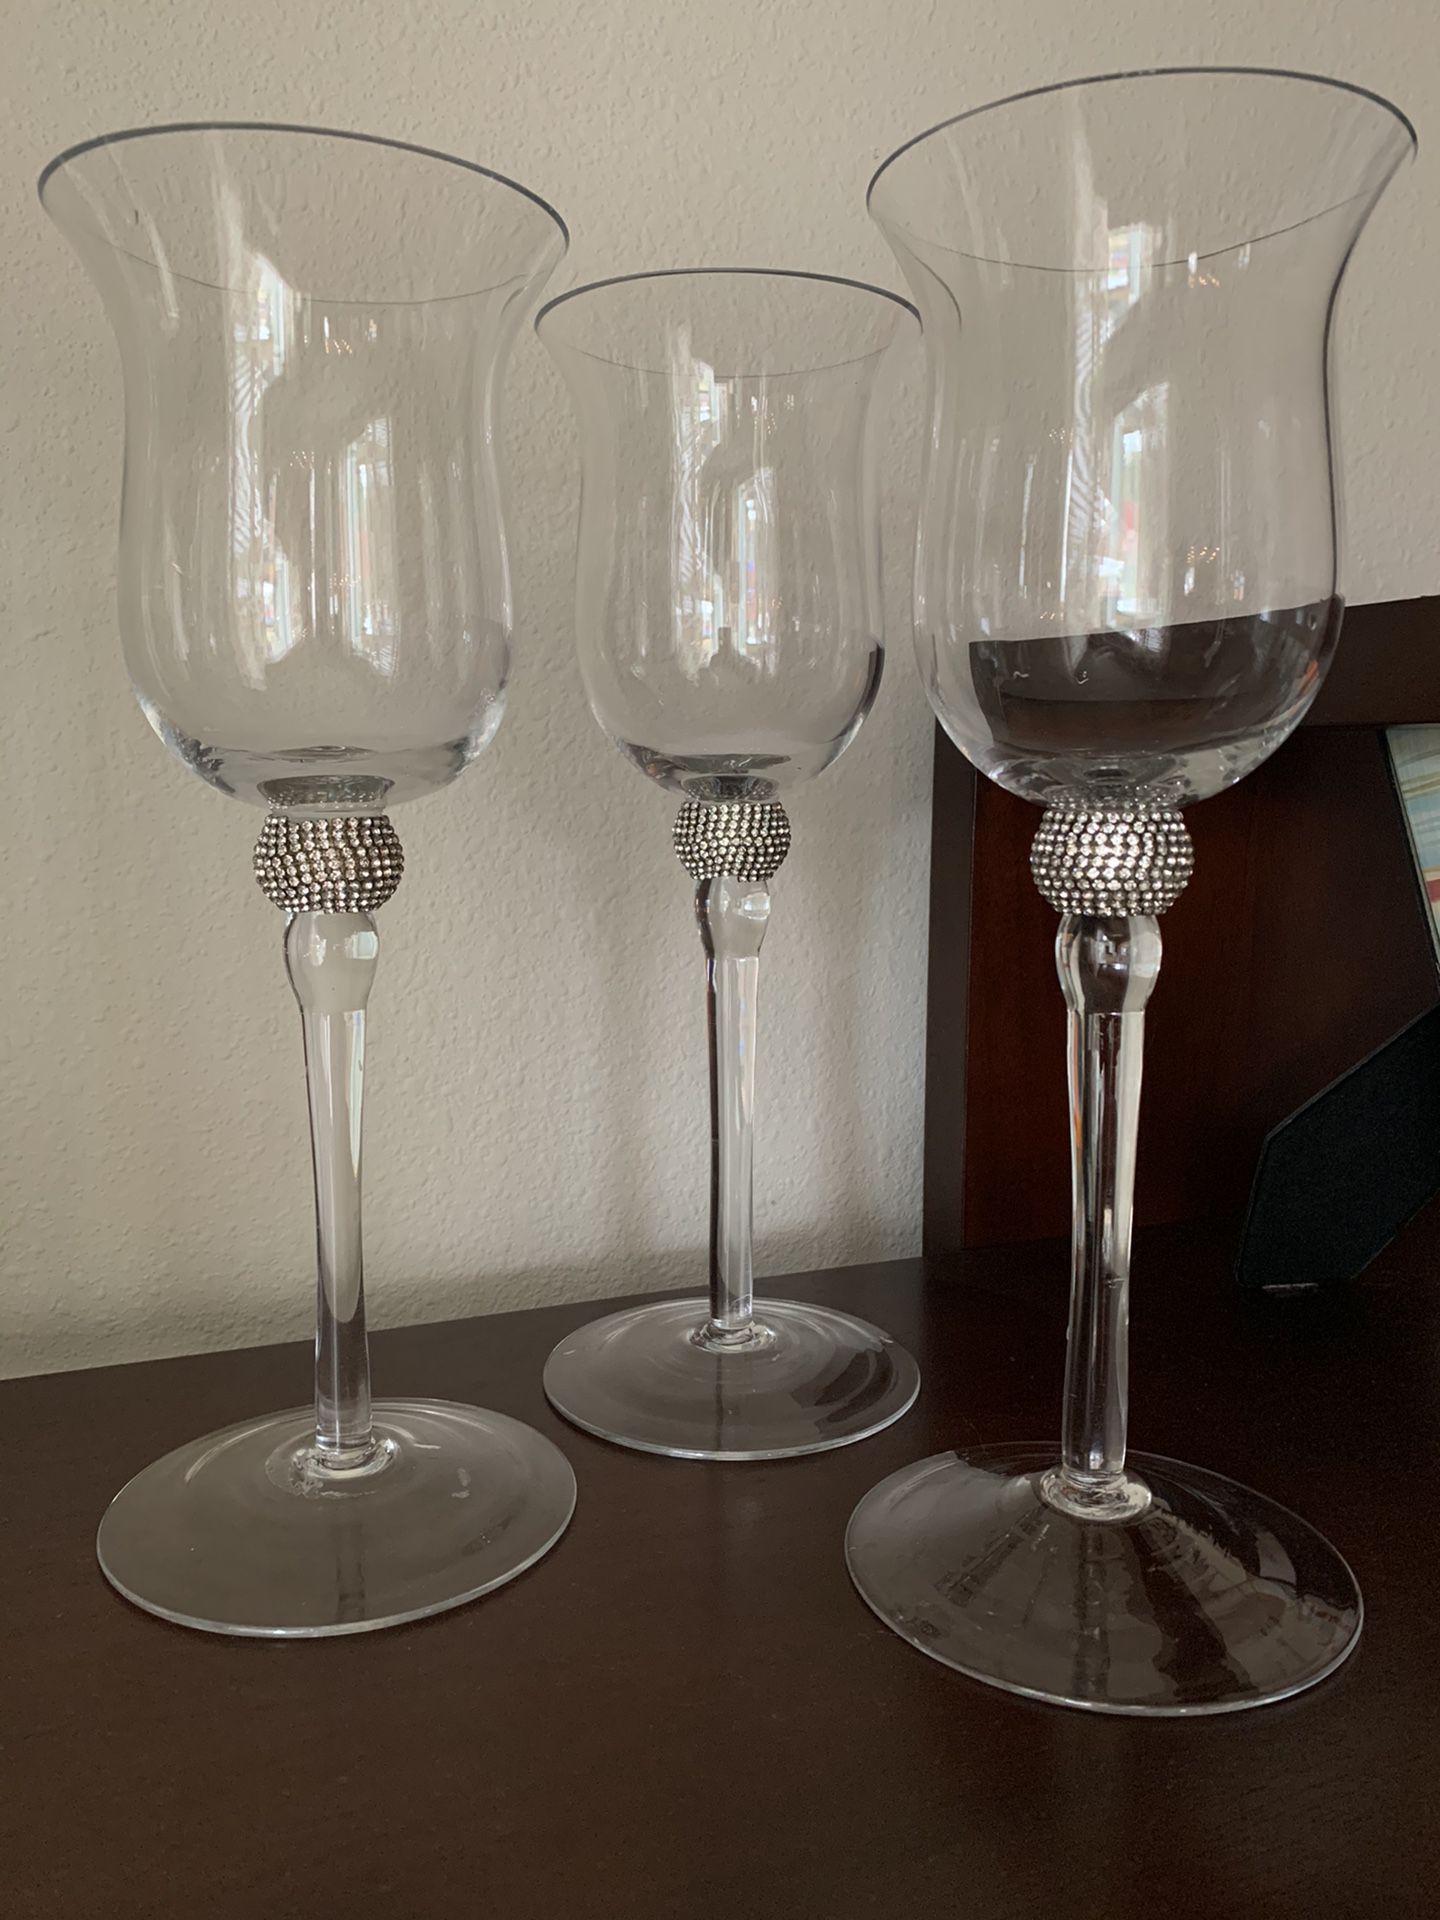 Set of 3 crystal long stem wine glass candle holders from Pier 1 one